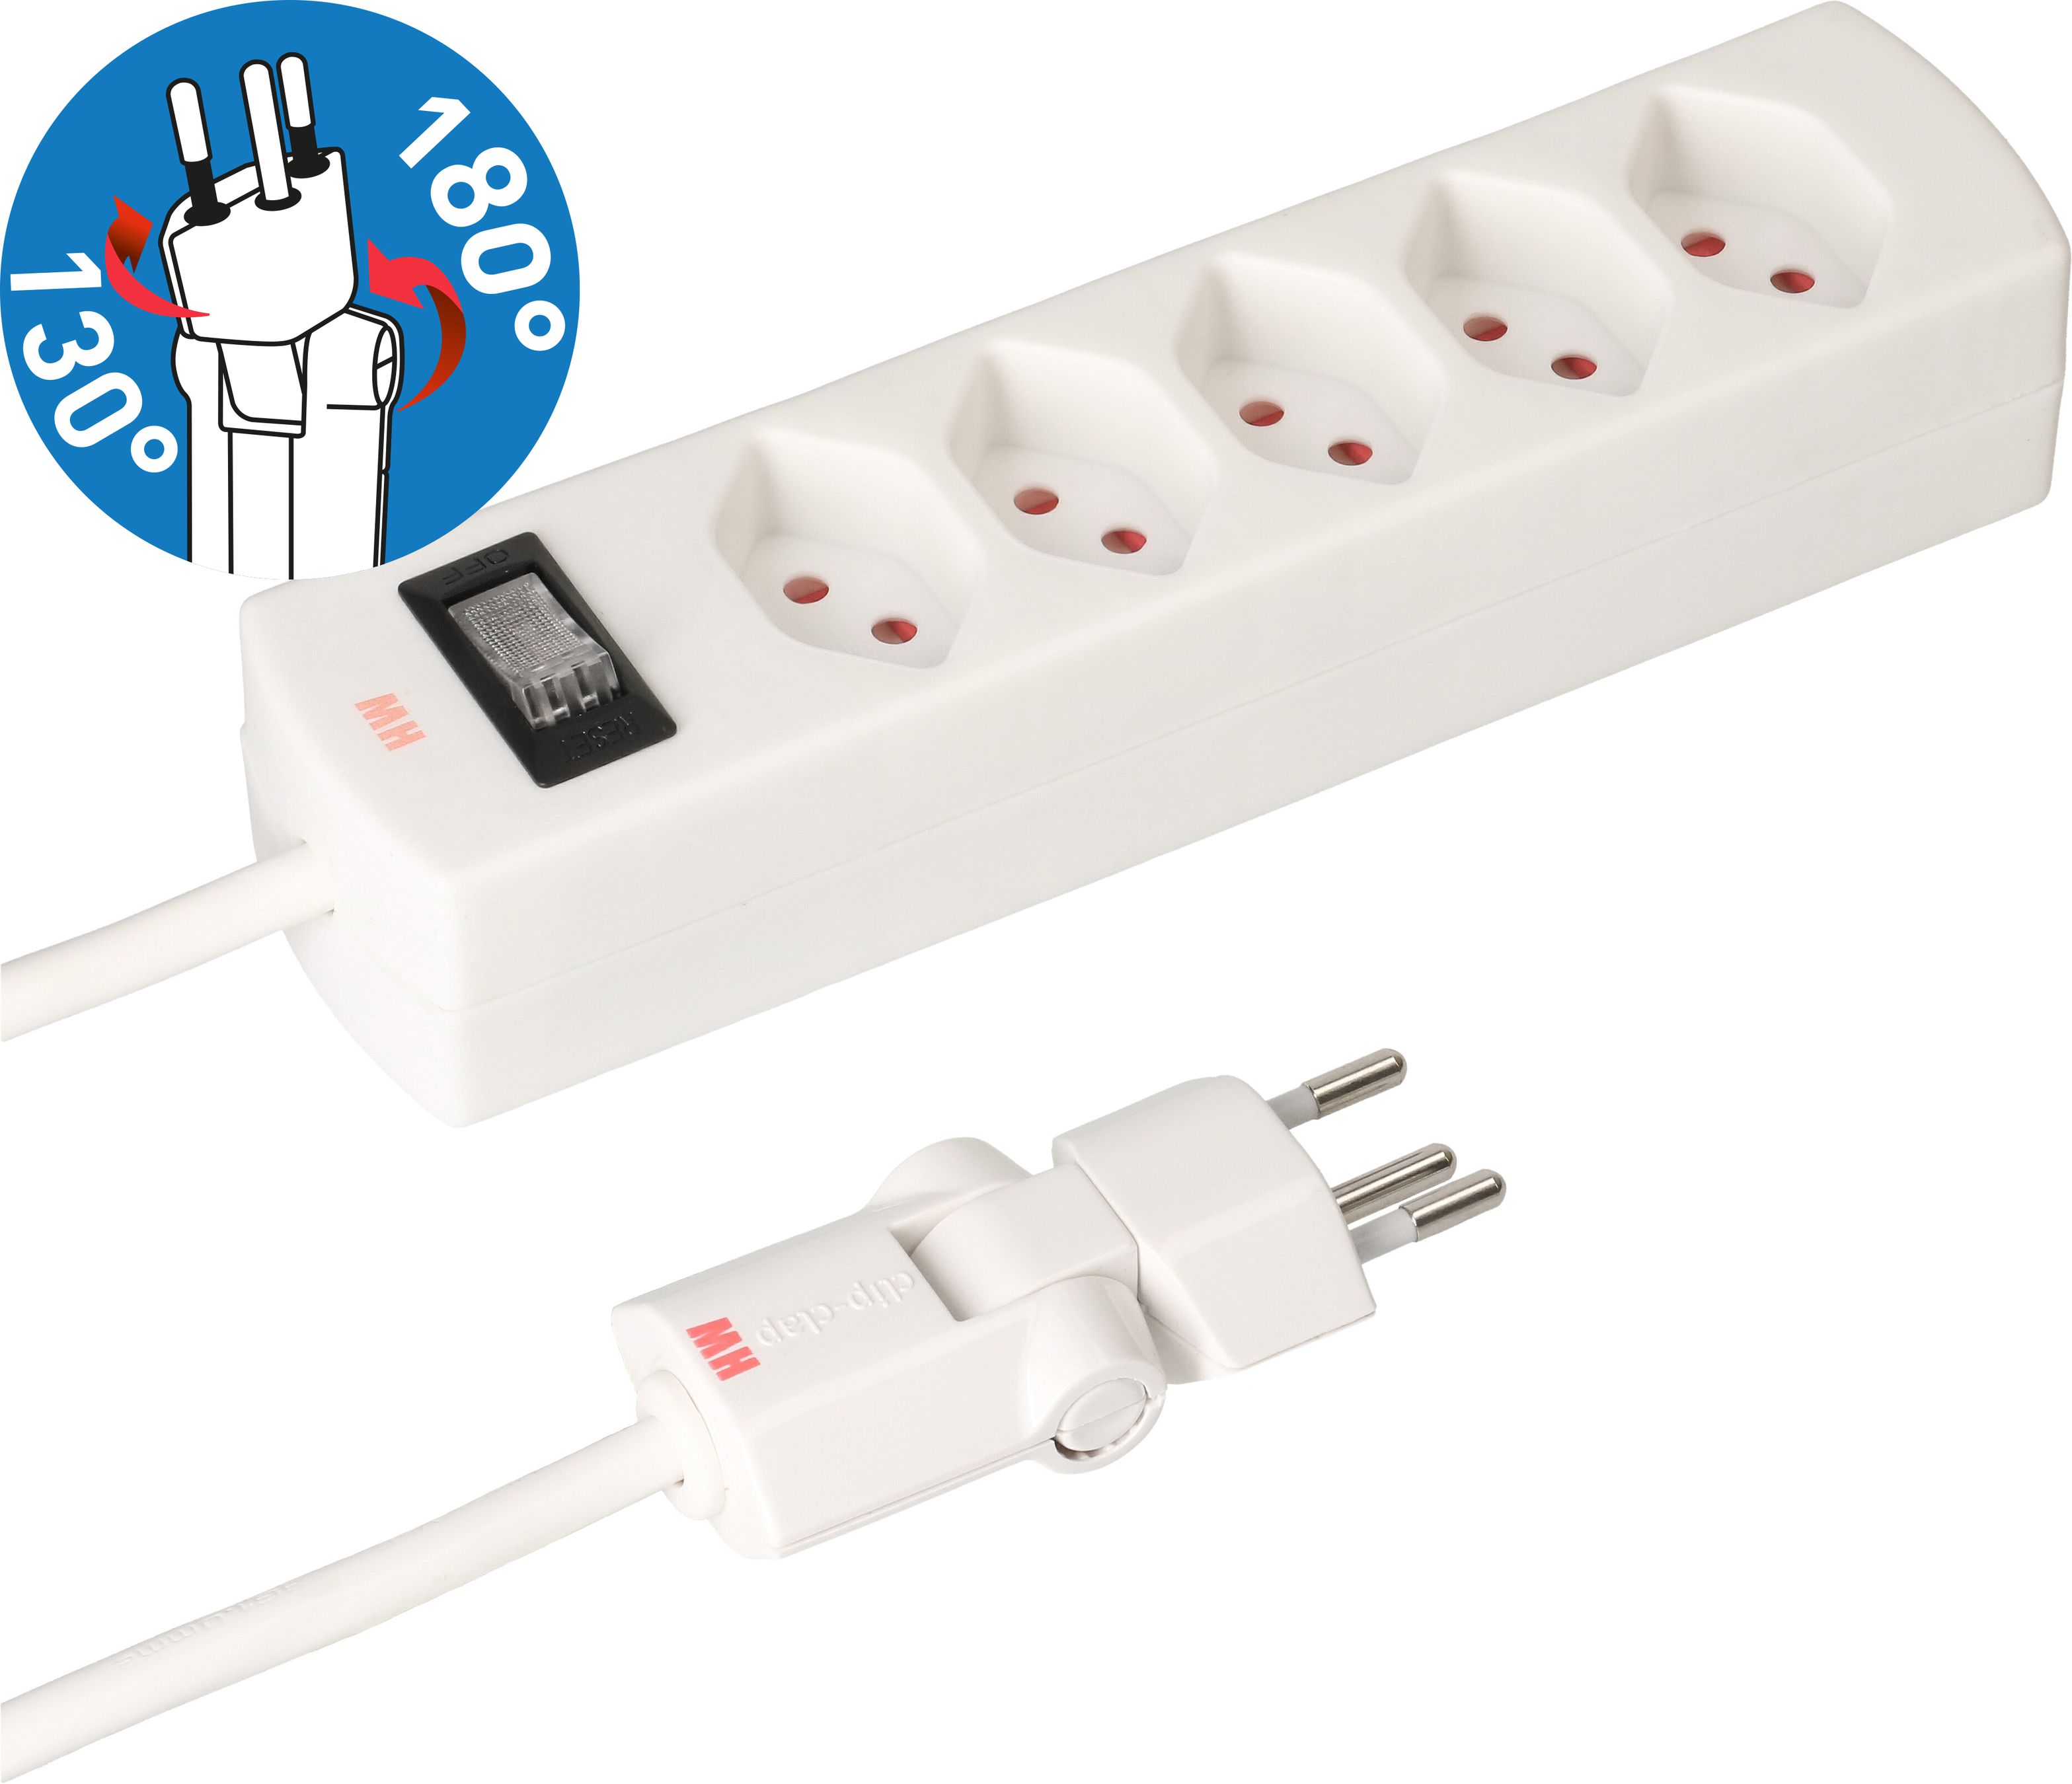 Multiple sockets Safety Line 5x type13